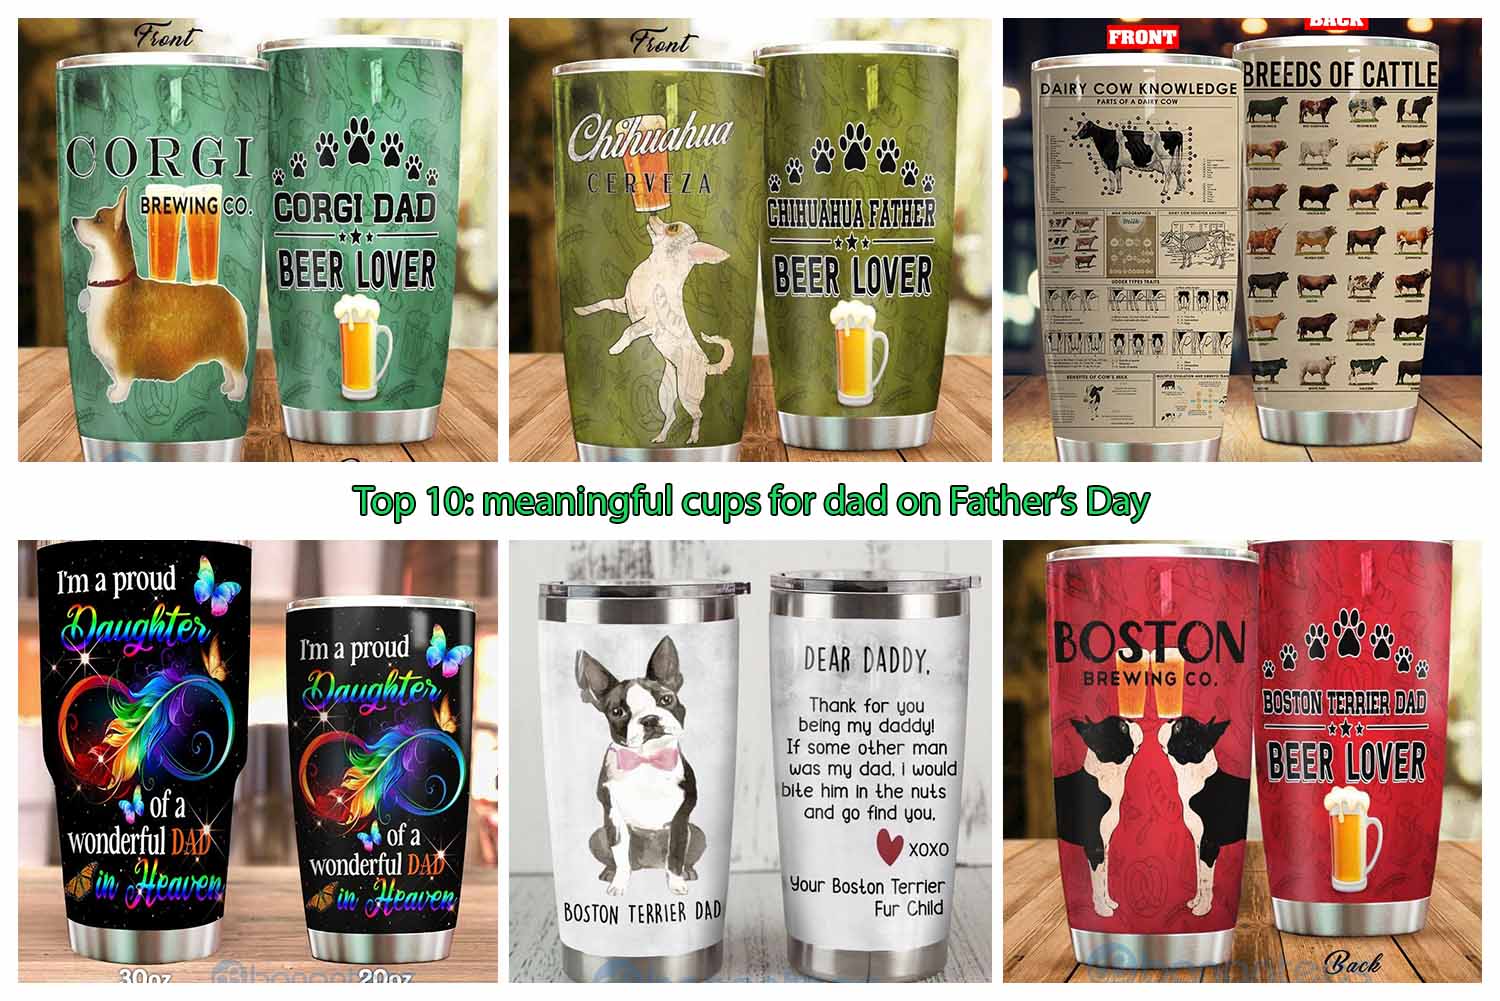 10 meaningful cups for dad on Father’s Day